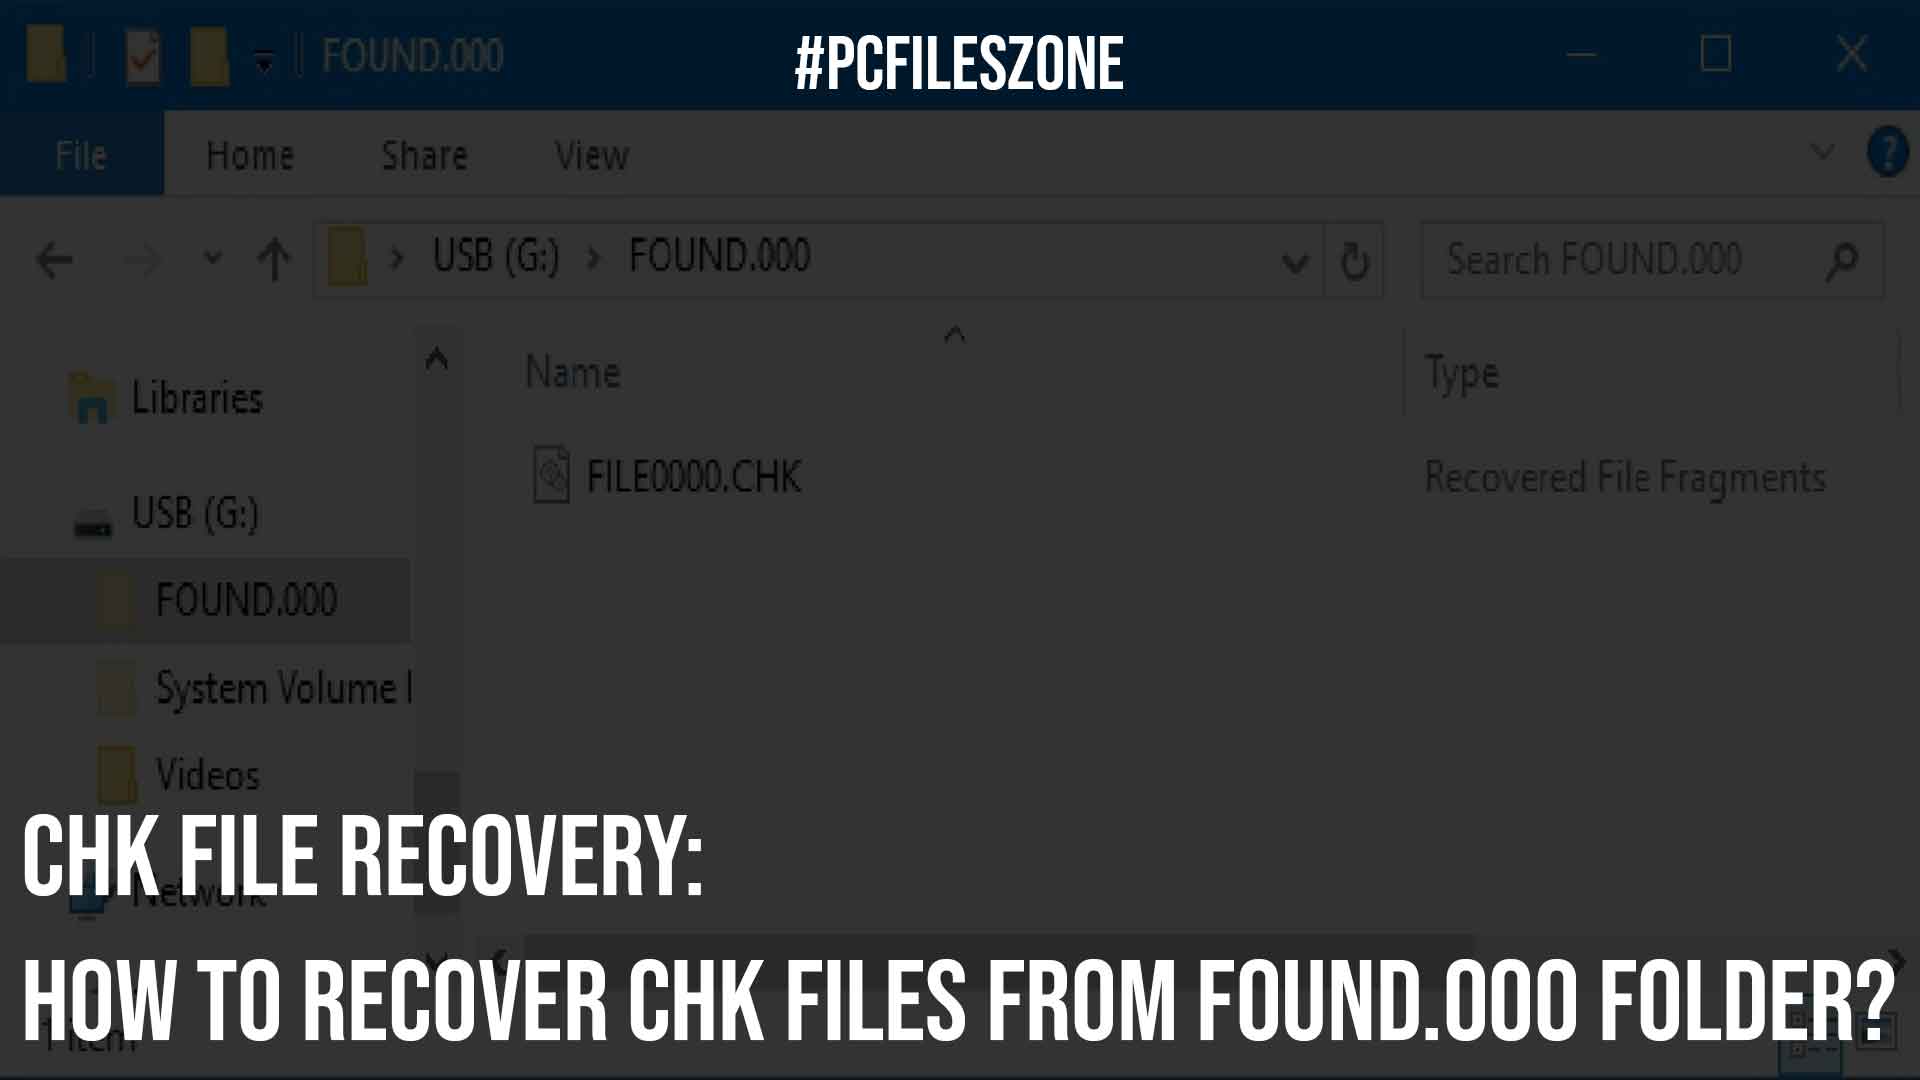 CHK File Recovery: How to Recover CHK Files from Found.000 Folder?